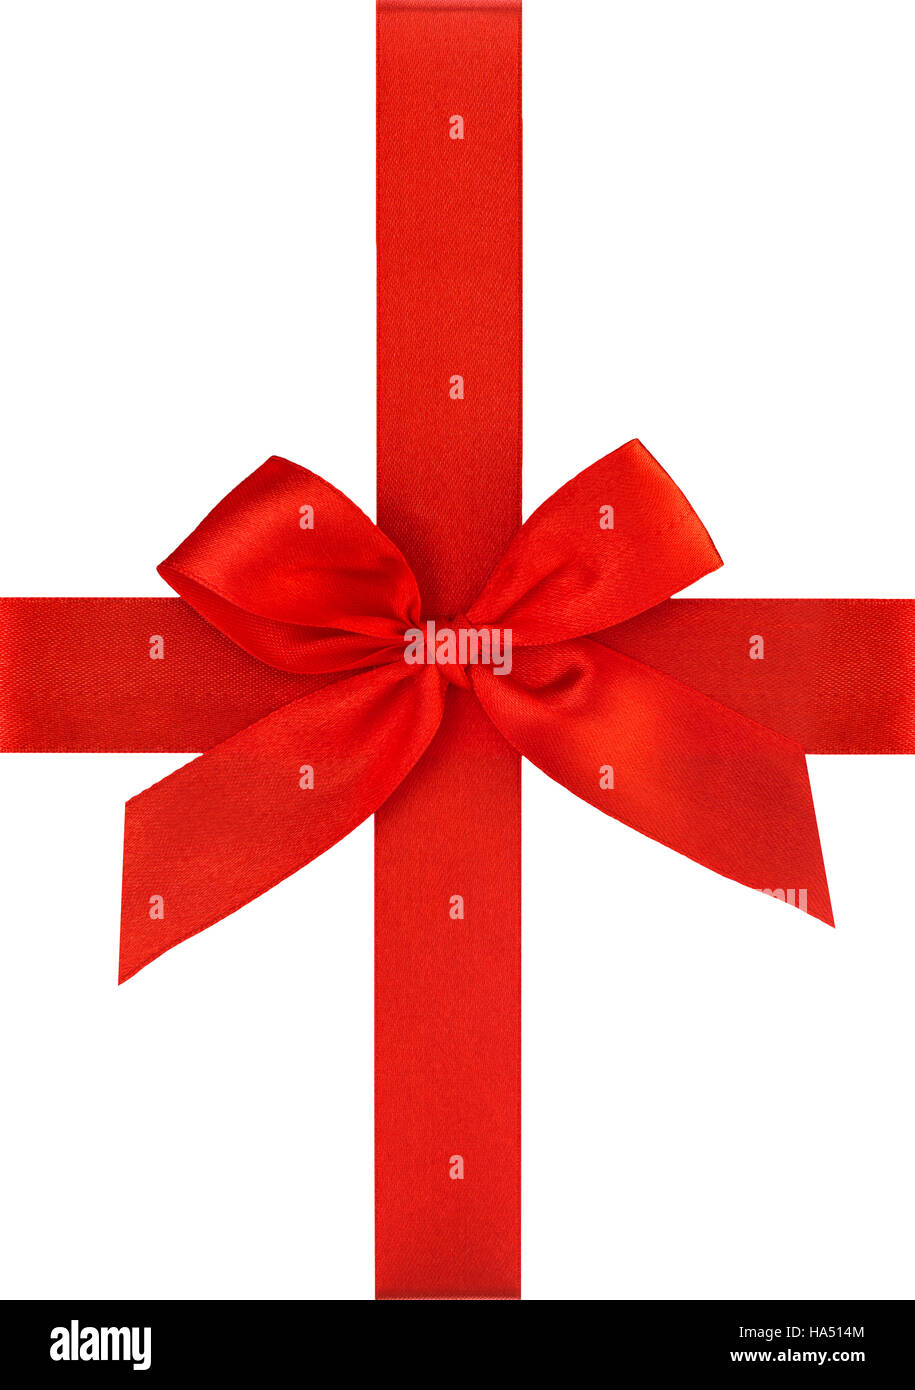 Red ribbon bow isolated on white. Holidays gift wrapping background Stock Photo